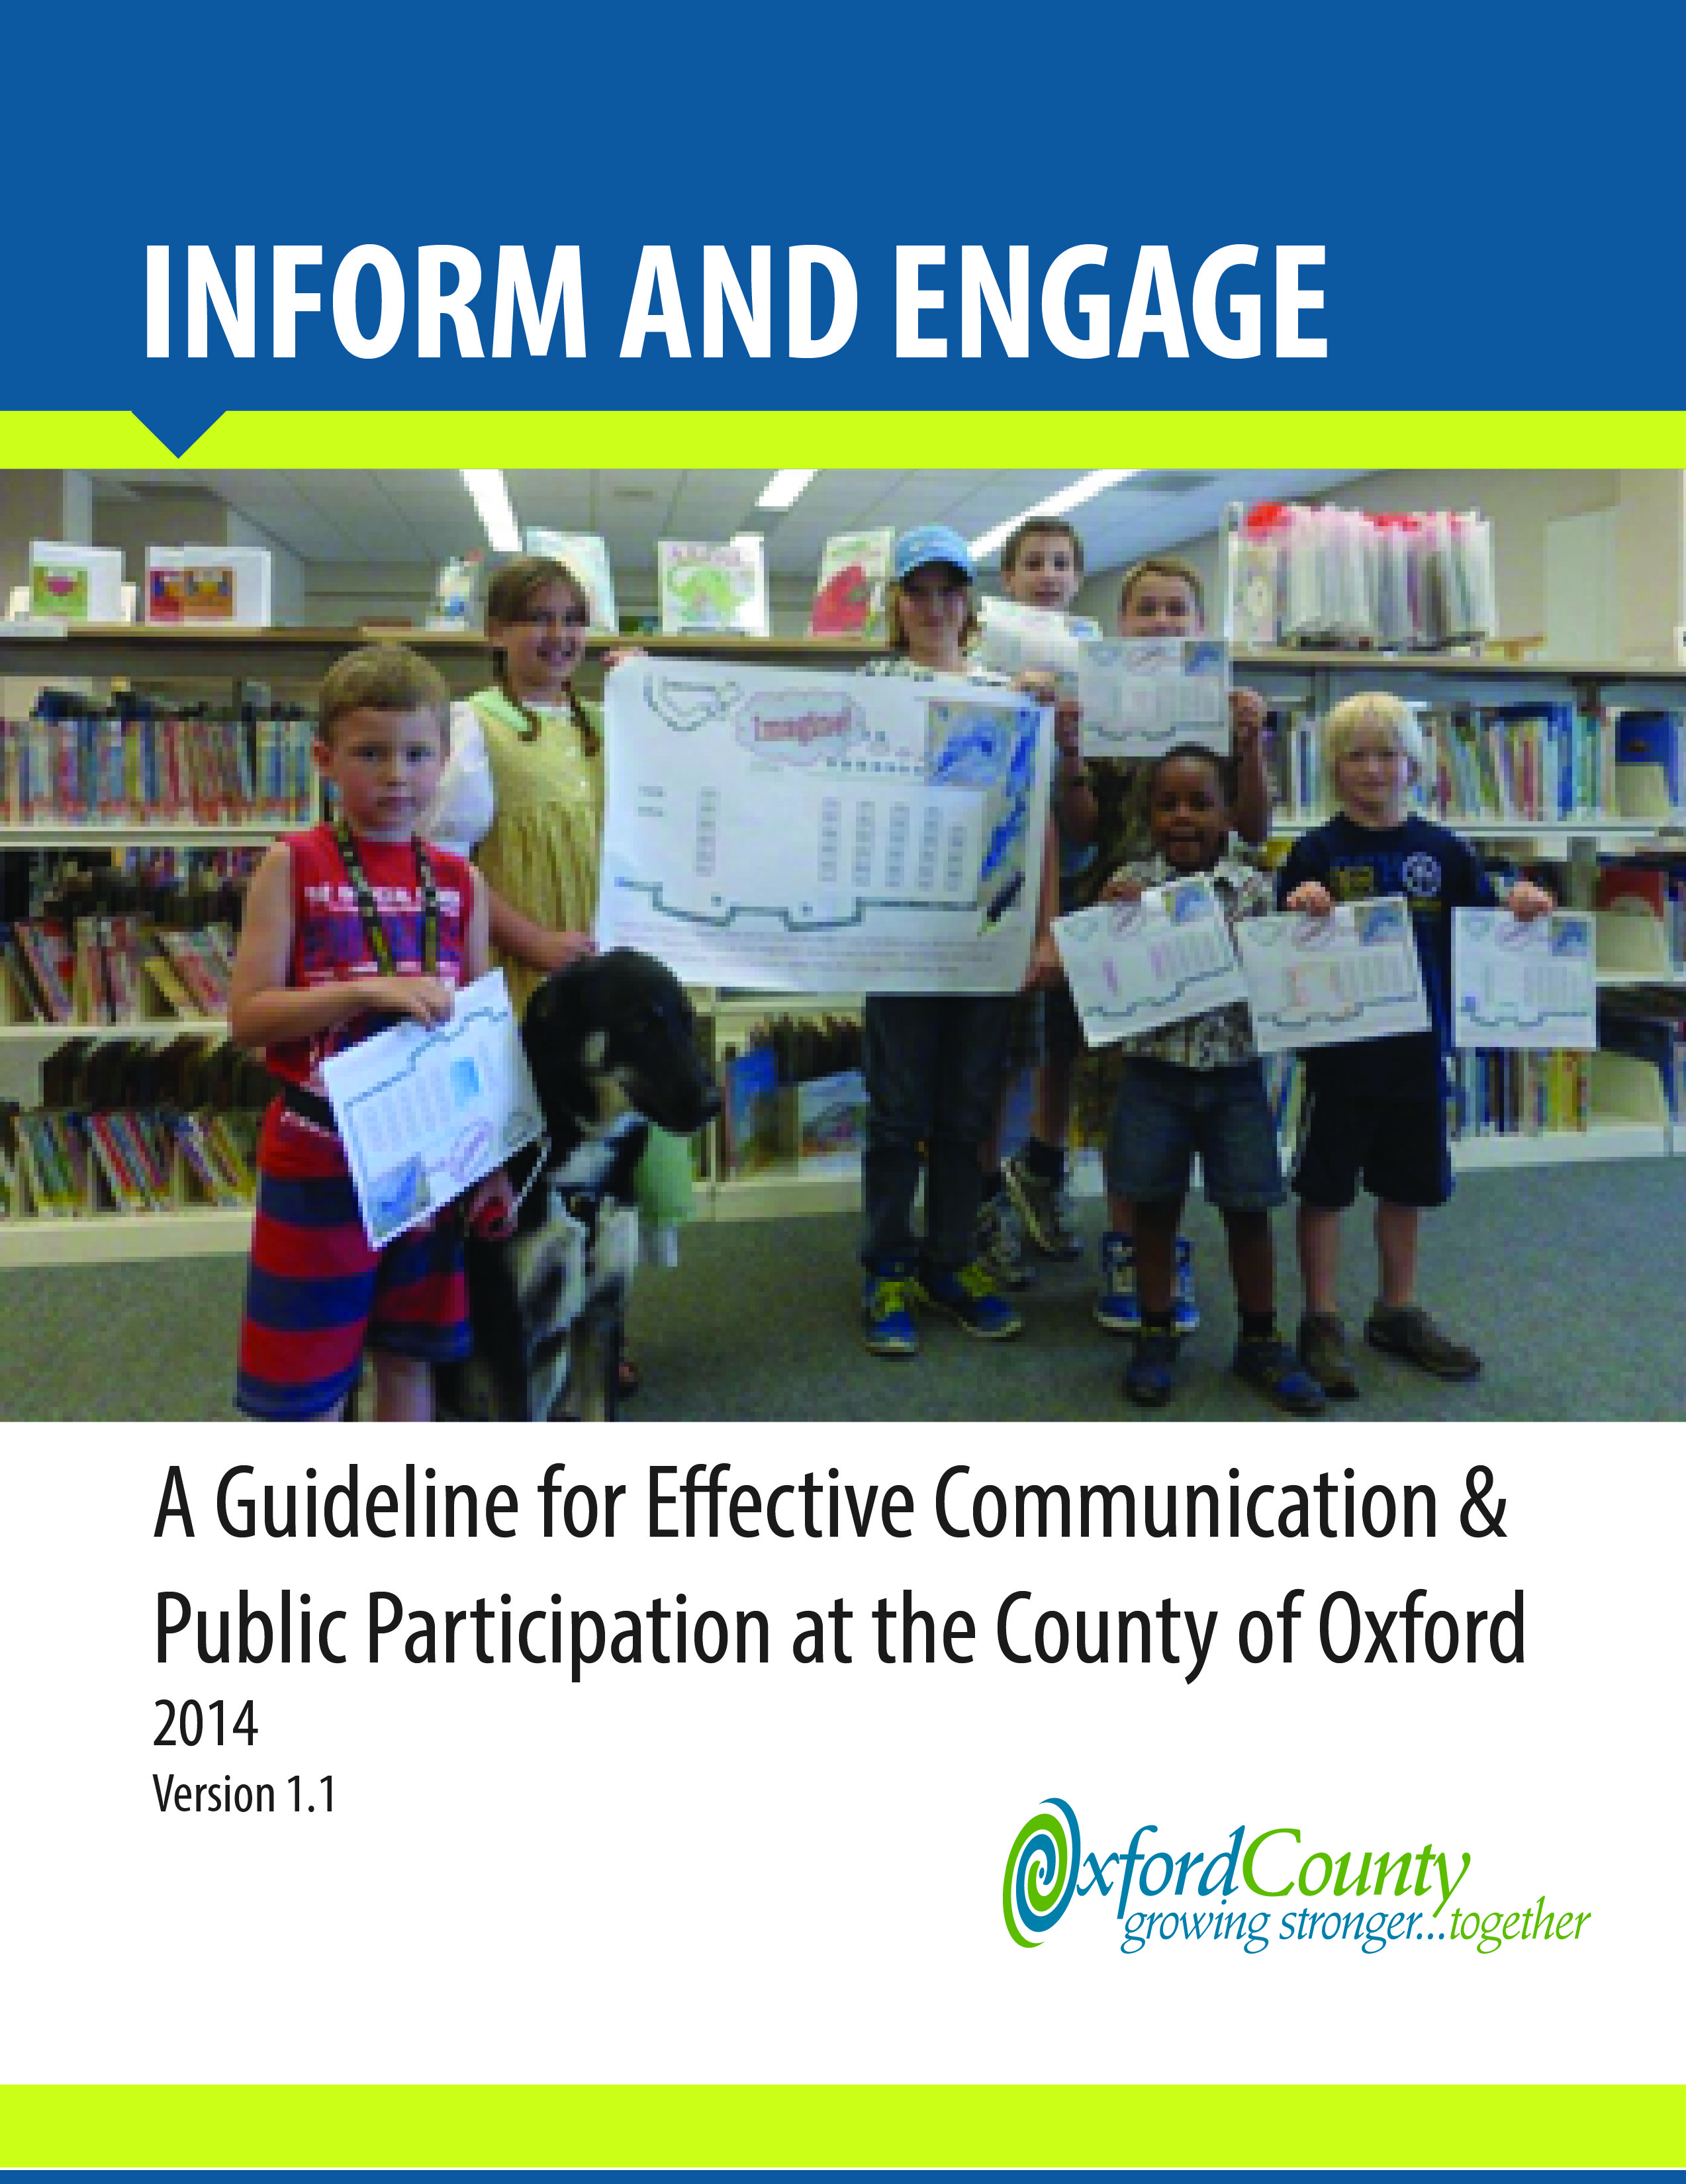 Children in a library holding up a sign, cover of the Inform and Engage publication